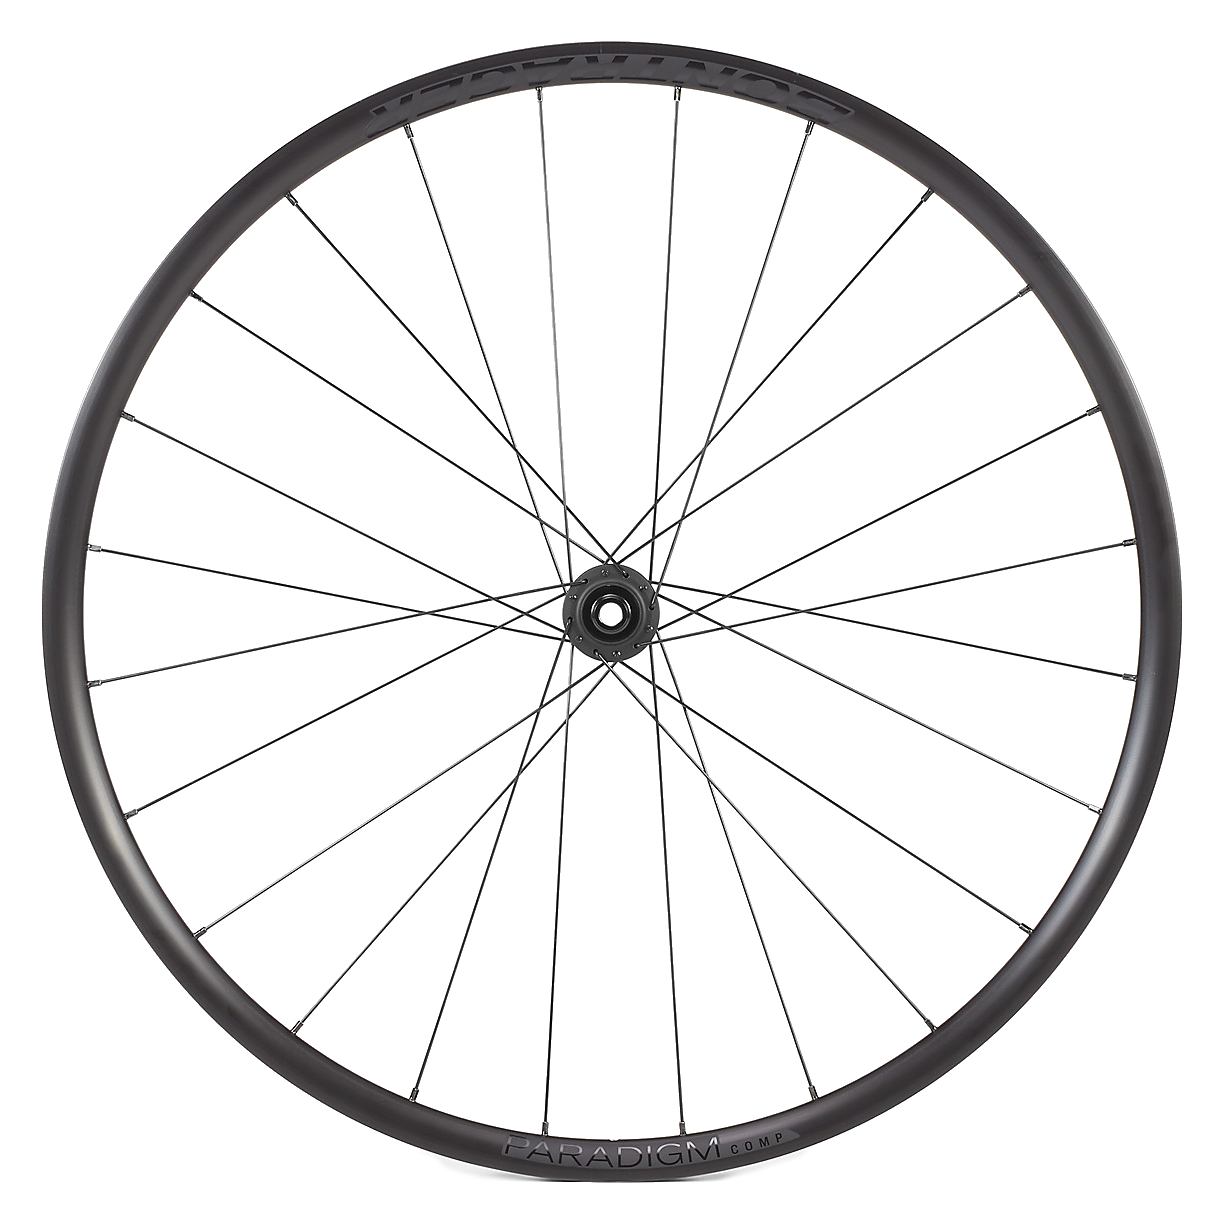 Picture of Bontrager Paradigm Comp TLR Disc Front Wheel - Clincher / Tubeless - Centerlock - 12x100mm